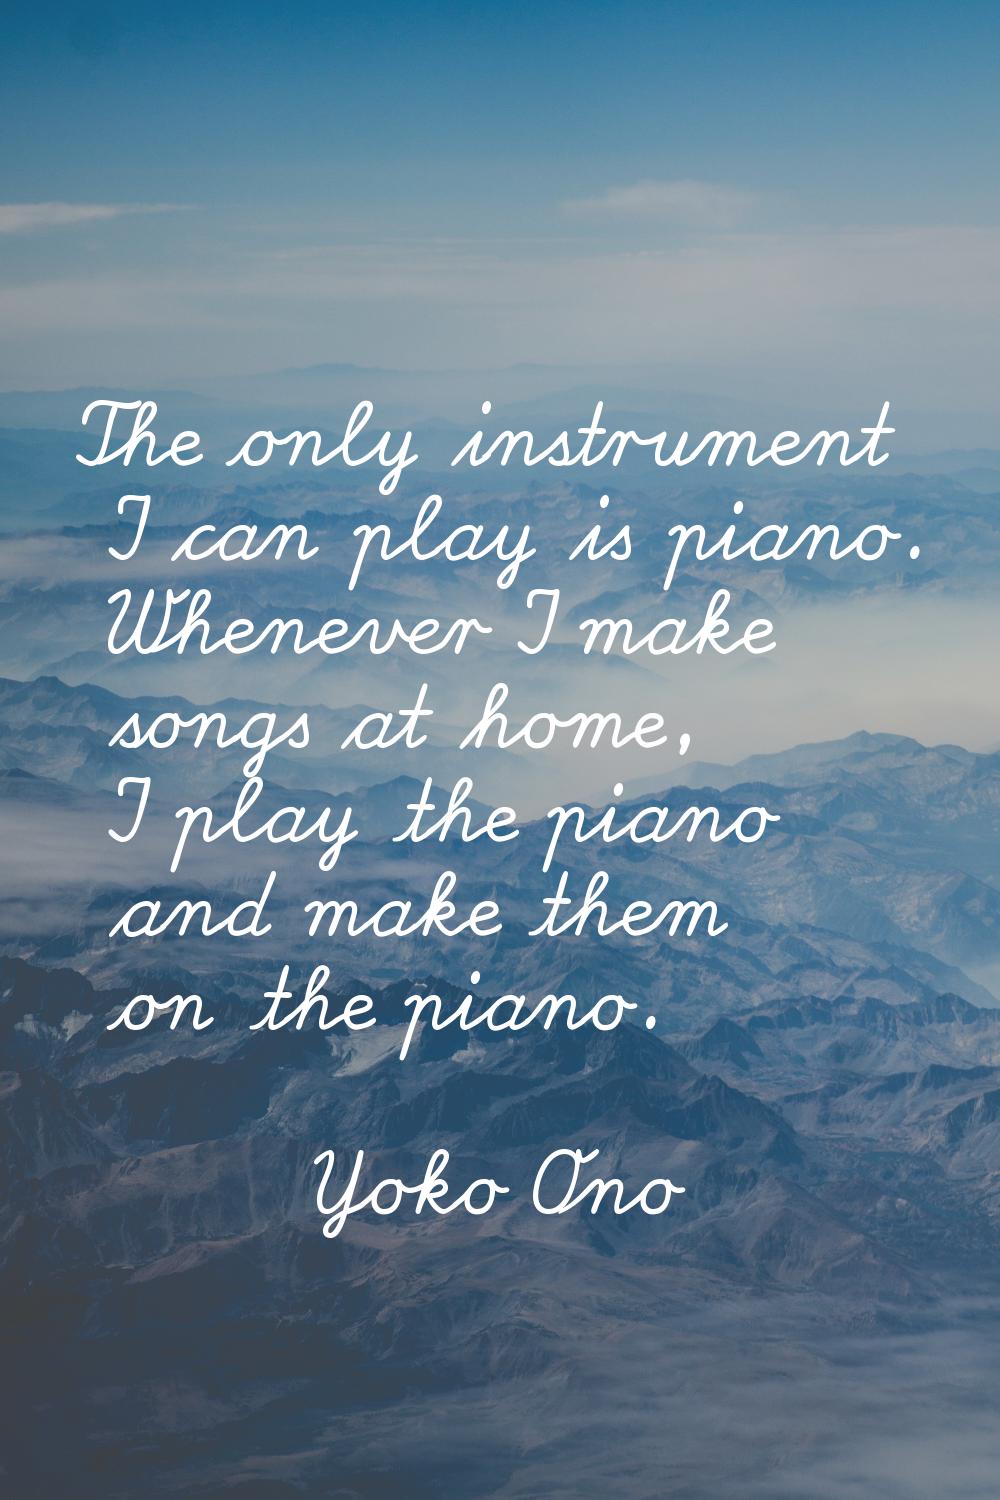 The only instrument I can play is piano. Whenever I make songs at home, I play the piano and make t